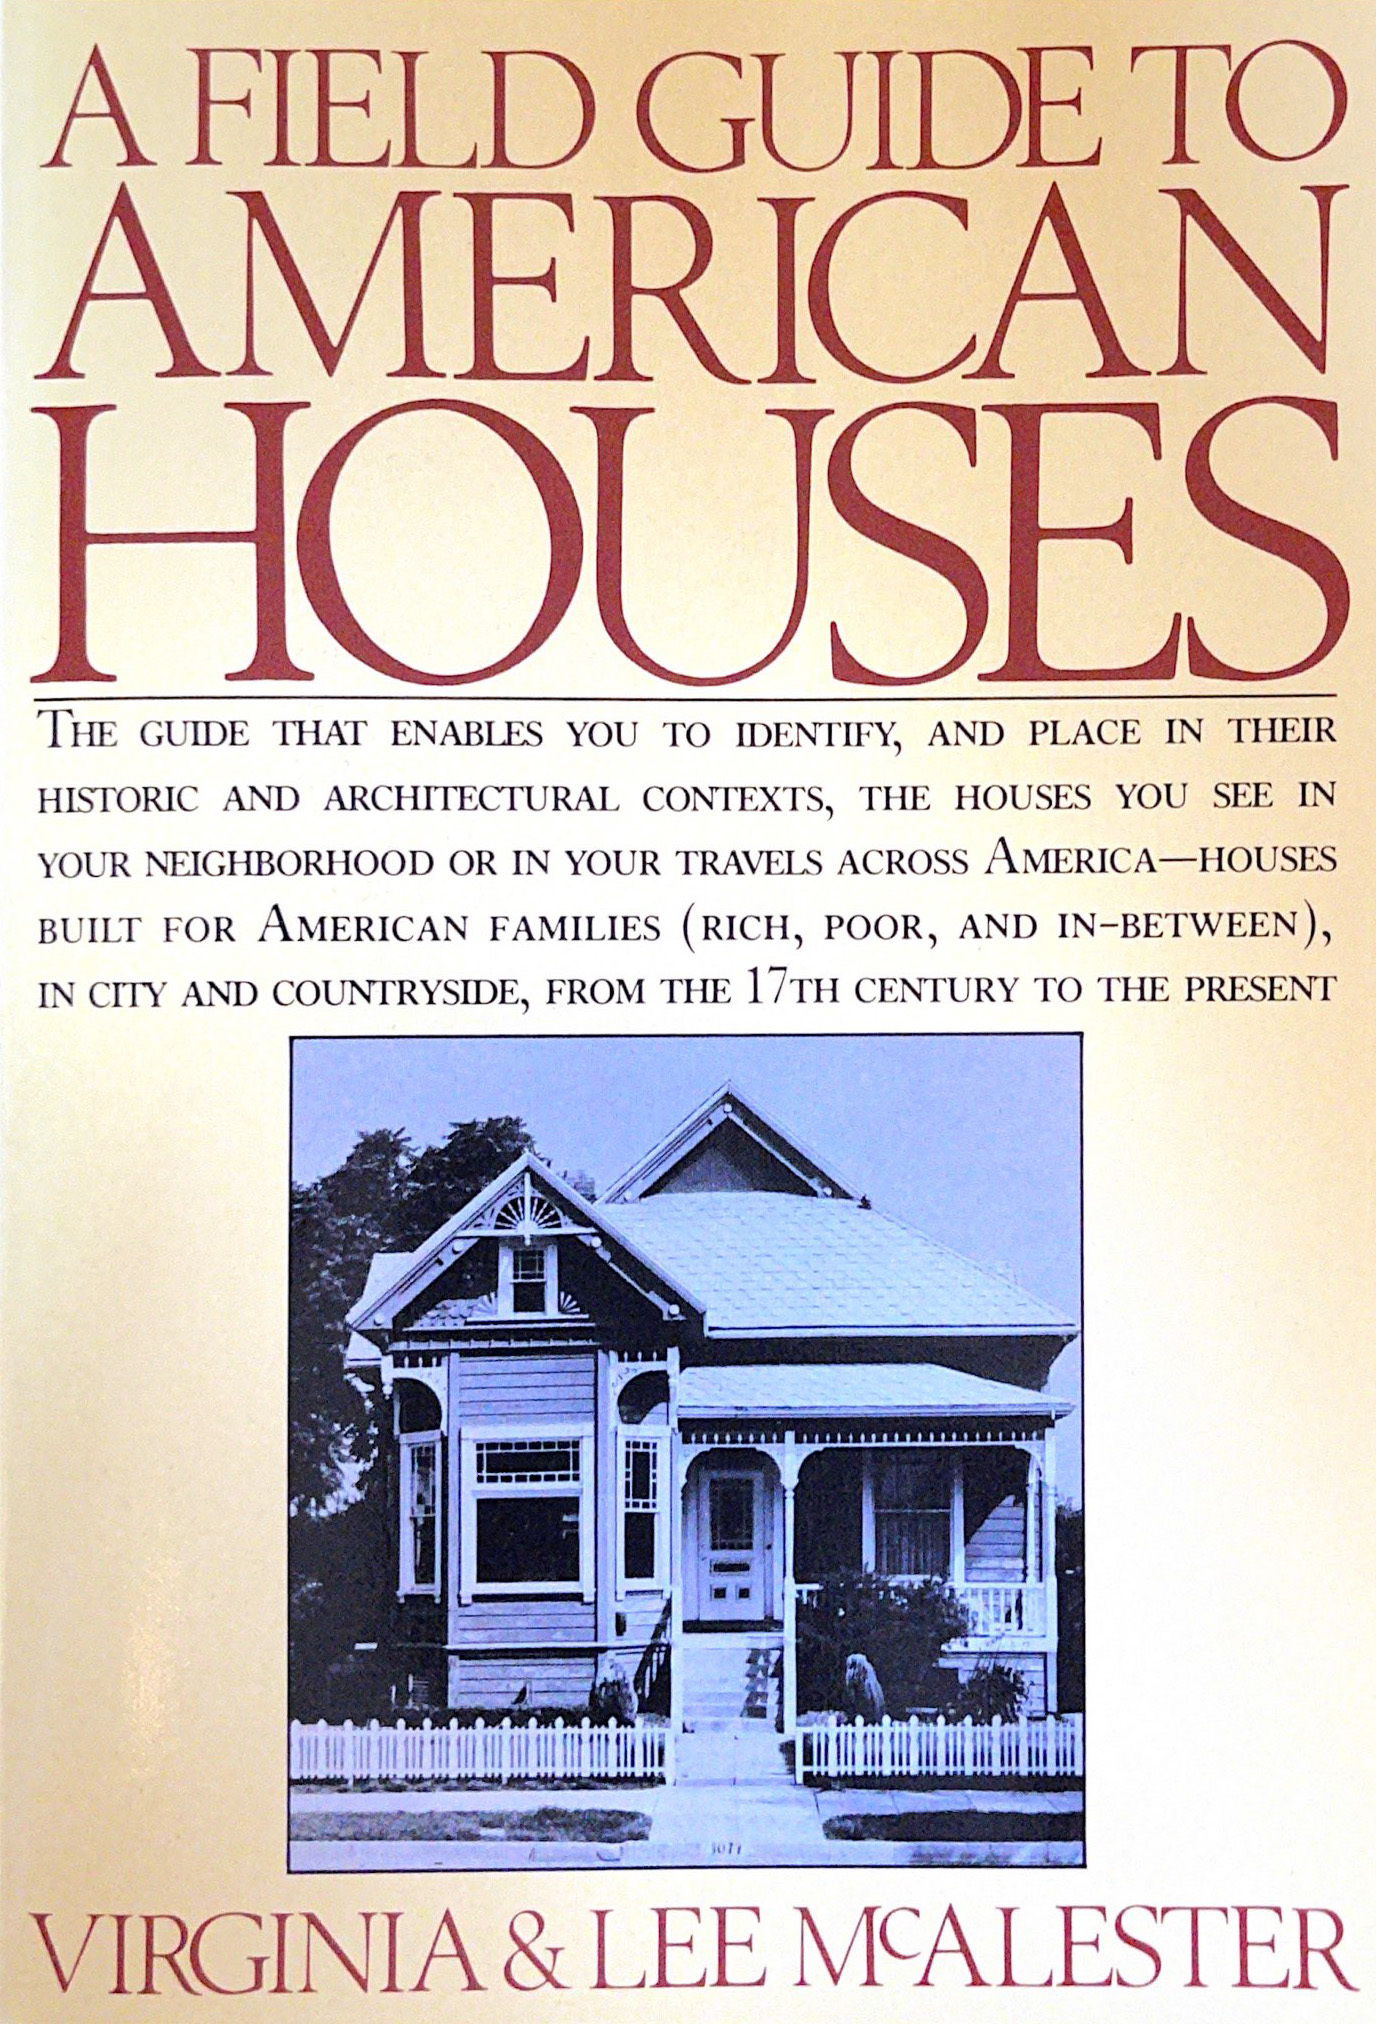 A Field Guide to American Houses by Virginia & Lee McAlester